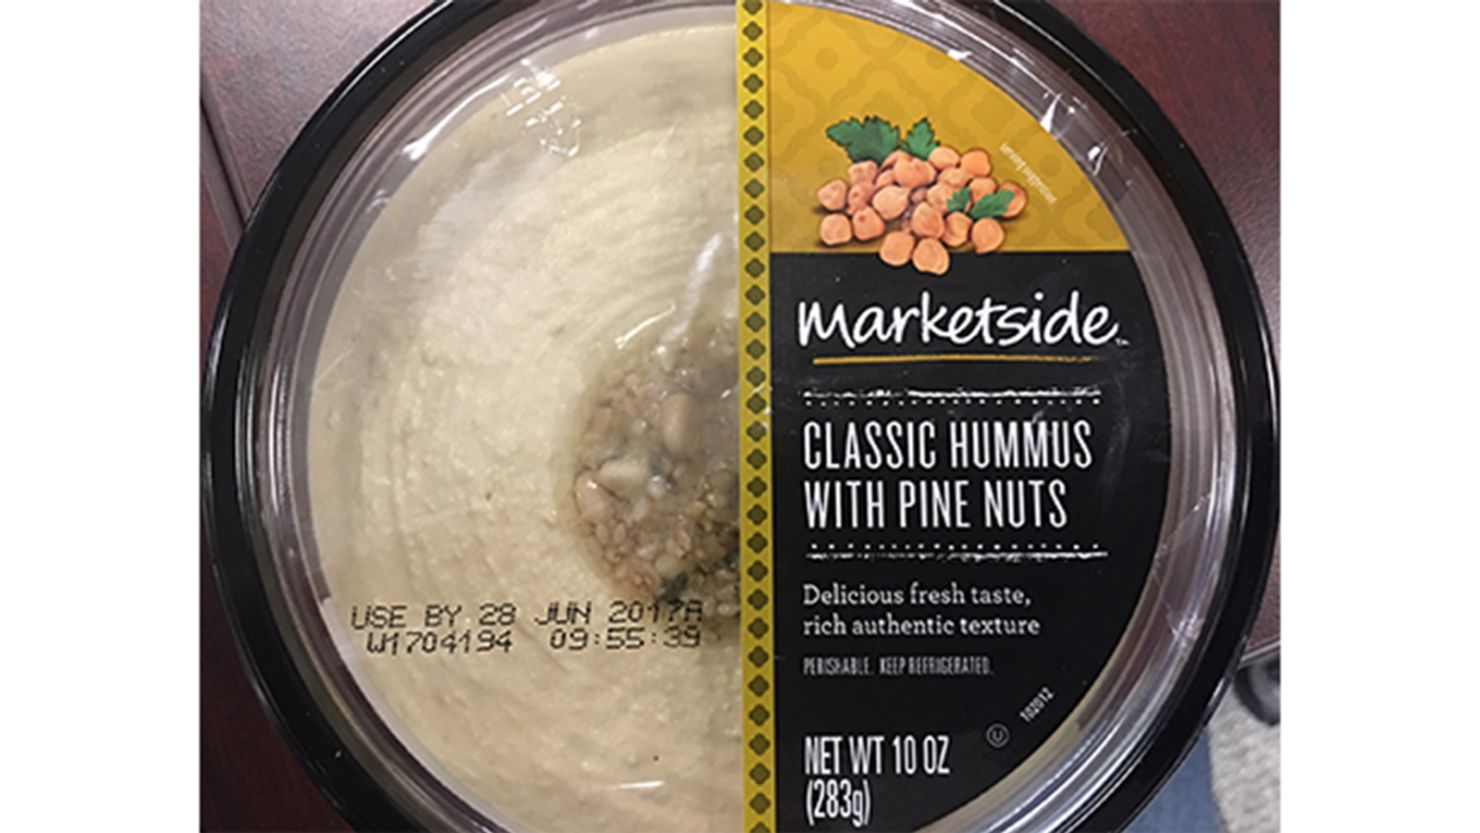 Marketside classic hummus with pine nuts is among the products being recalled.